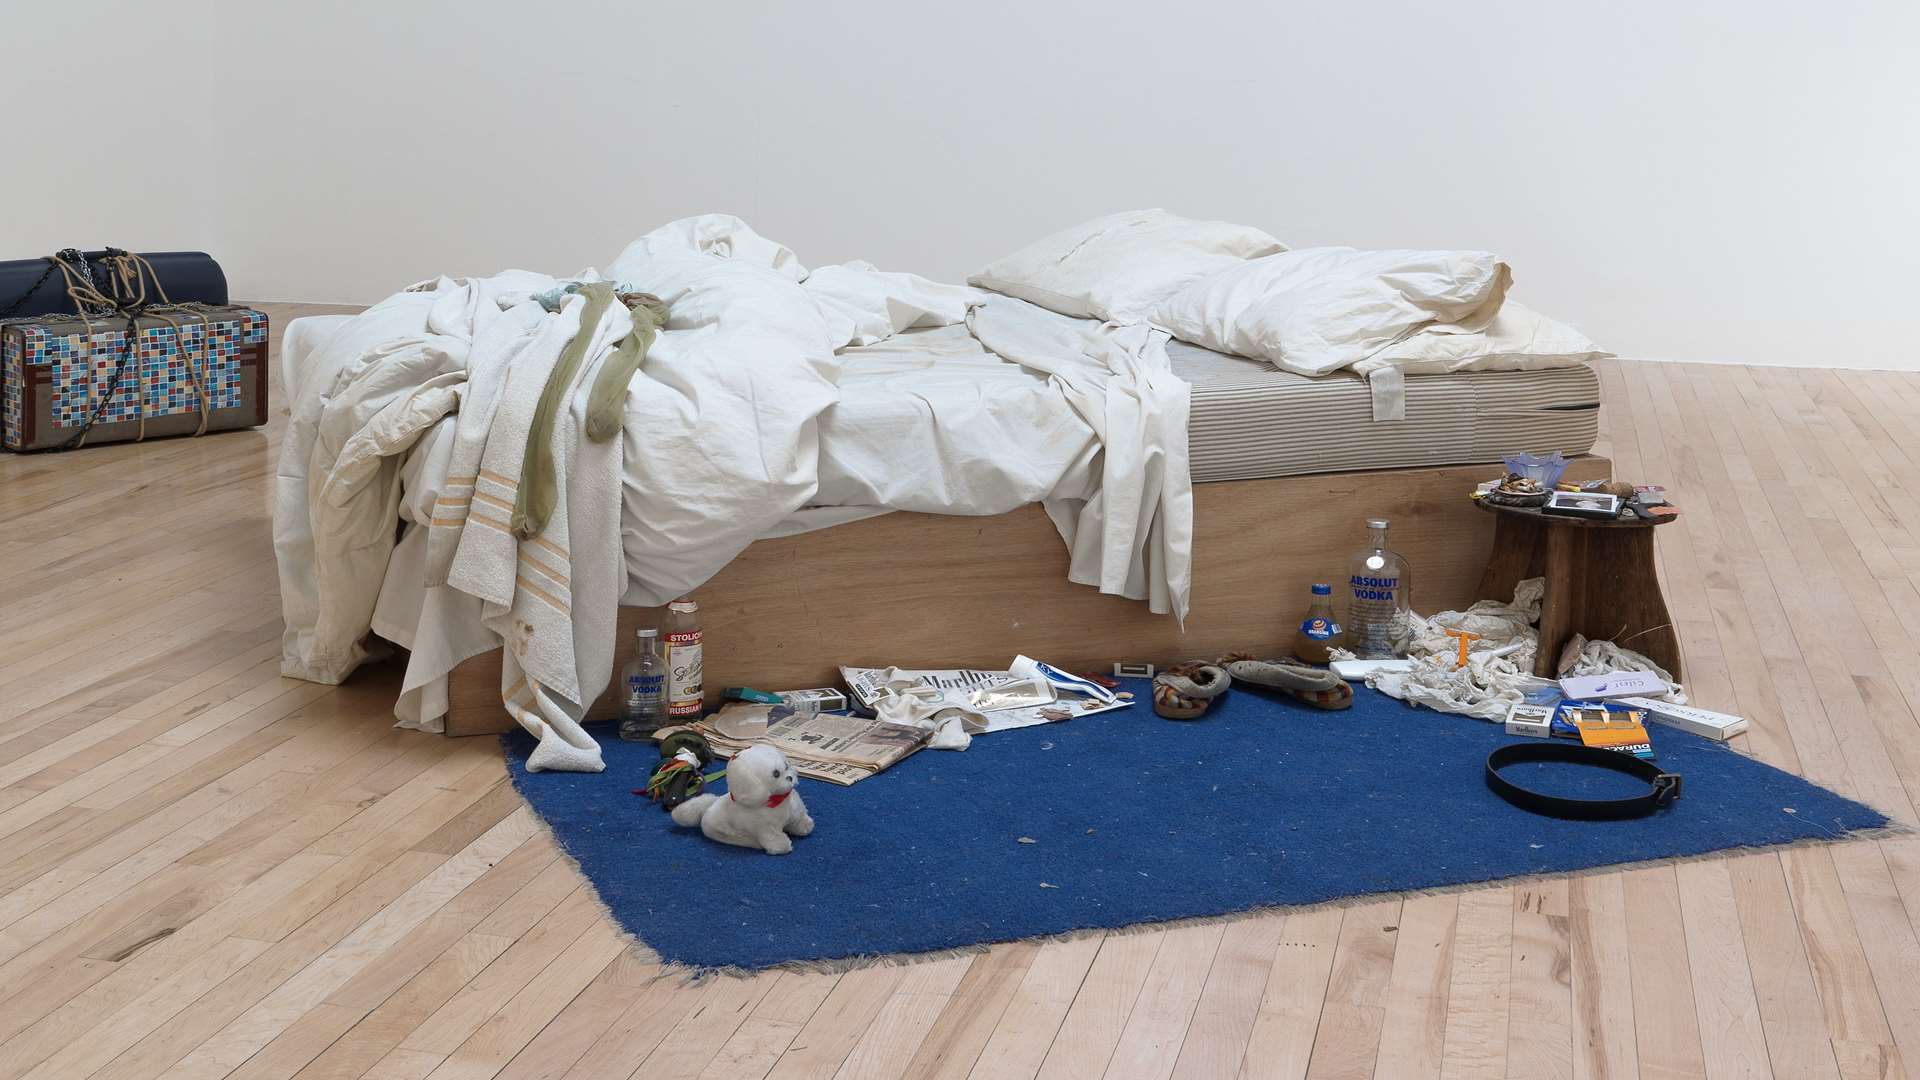 My Bed by Tracey Emin will be in Margate until January 14, 2018